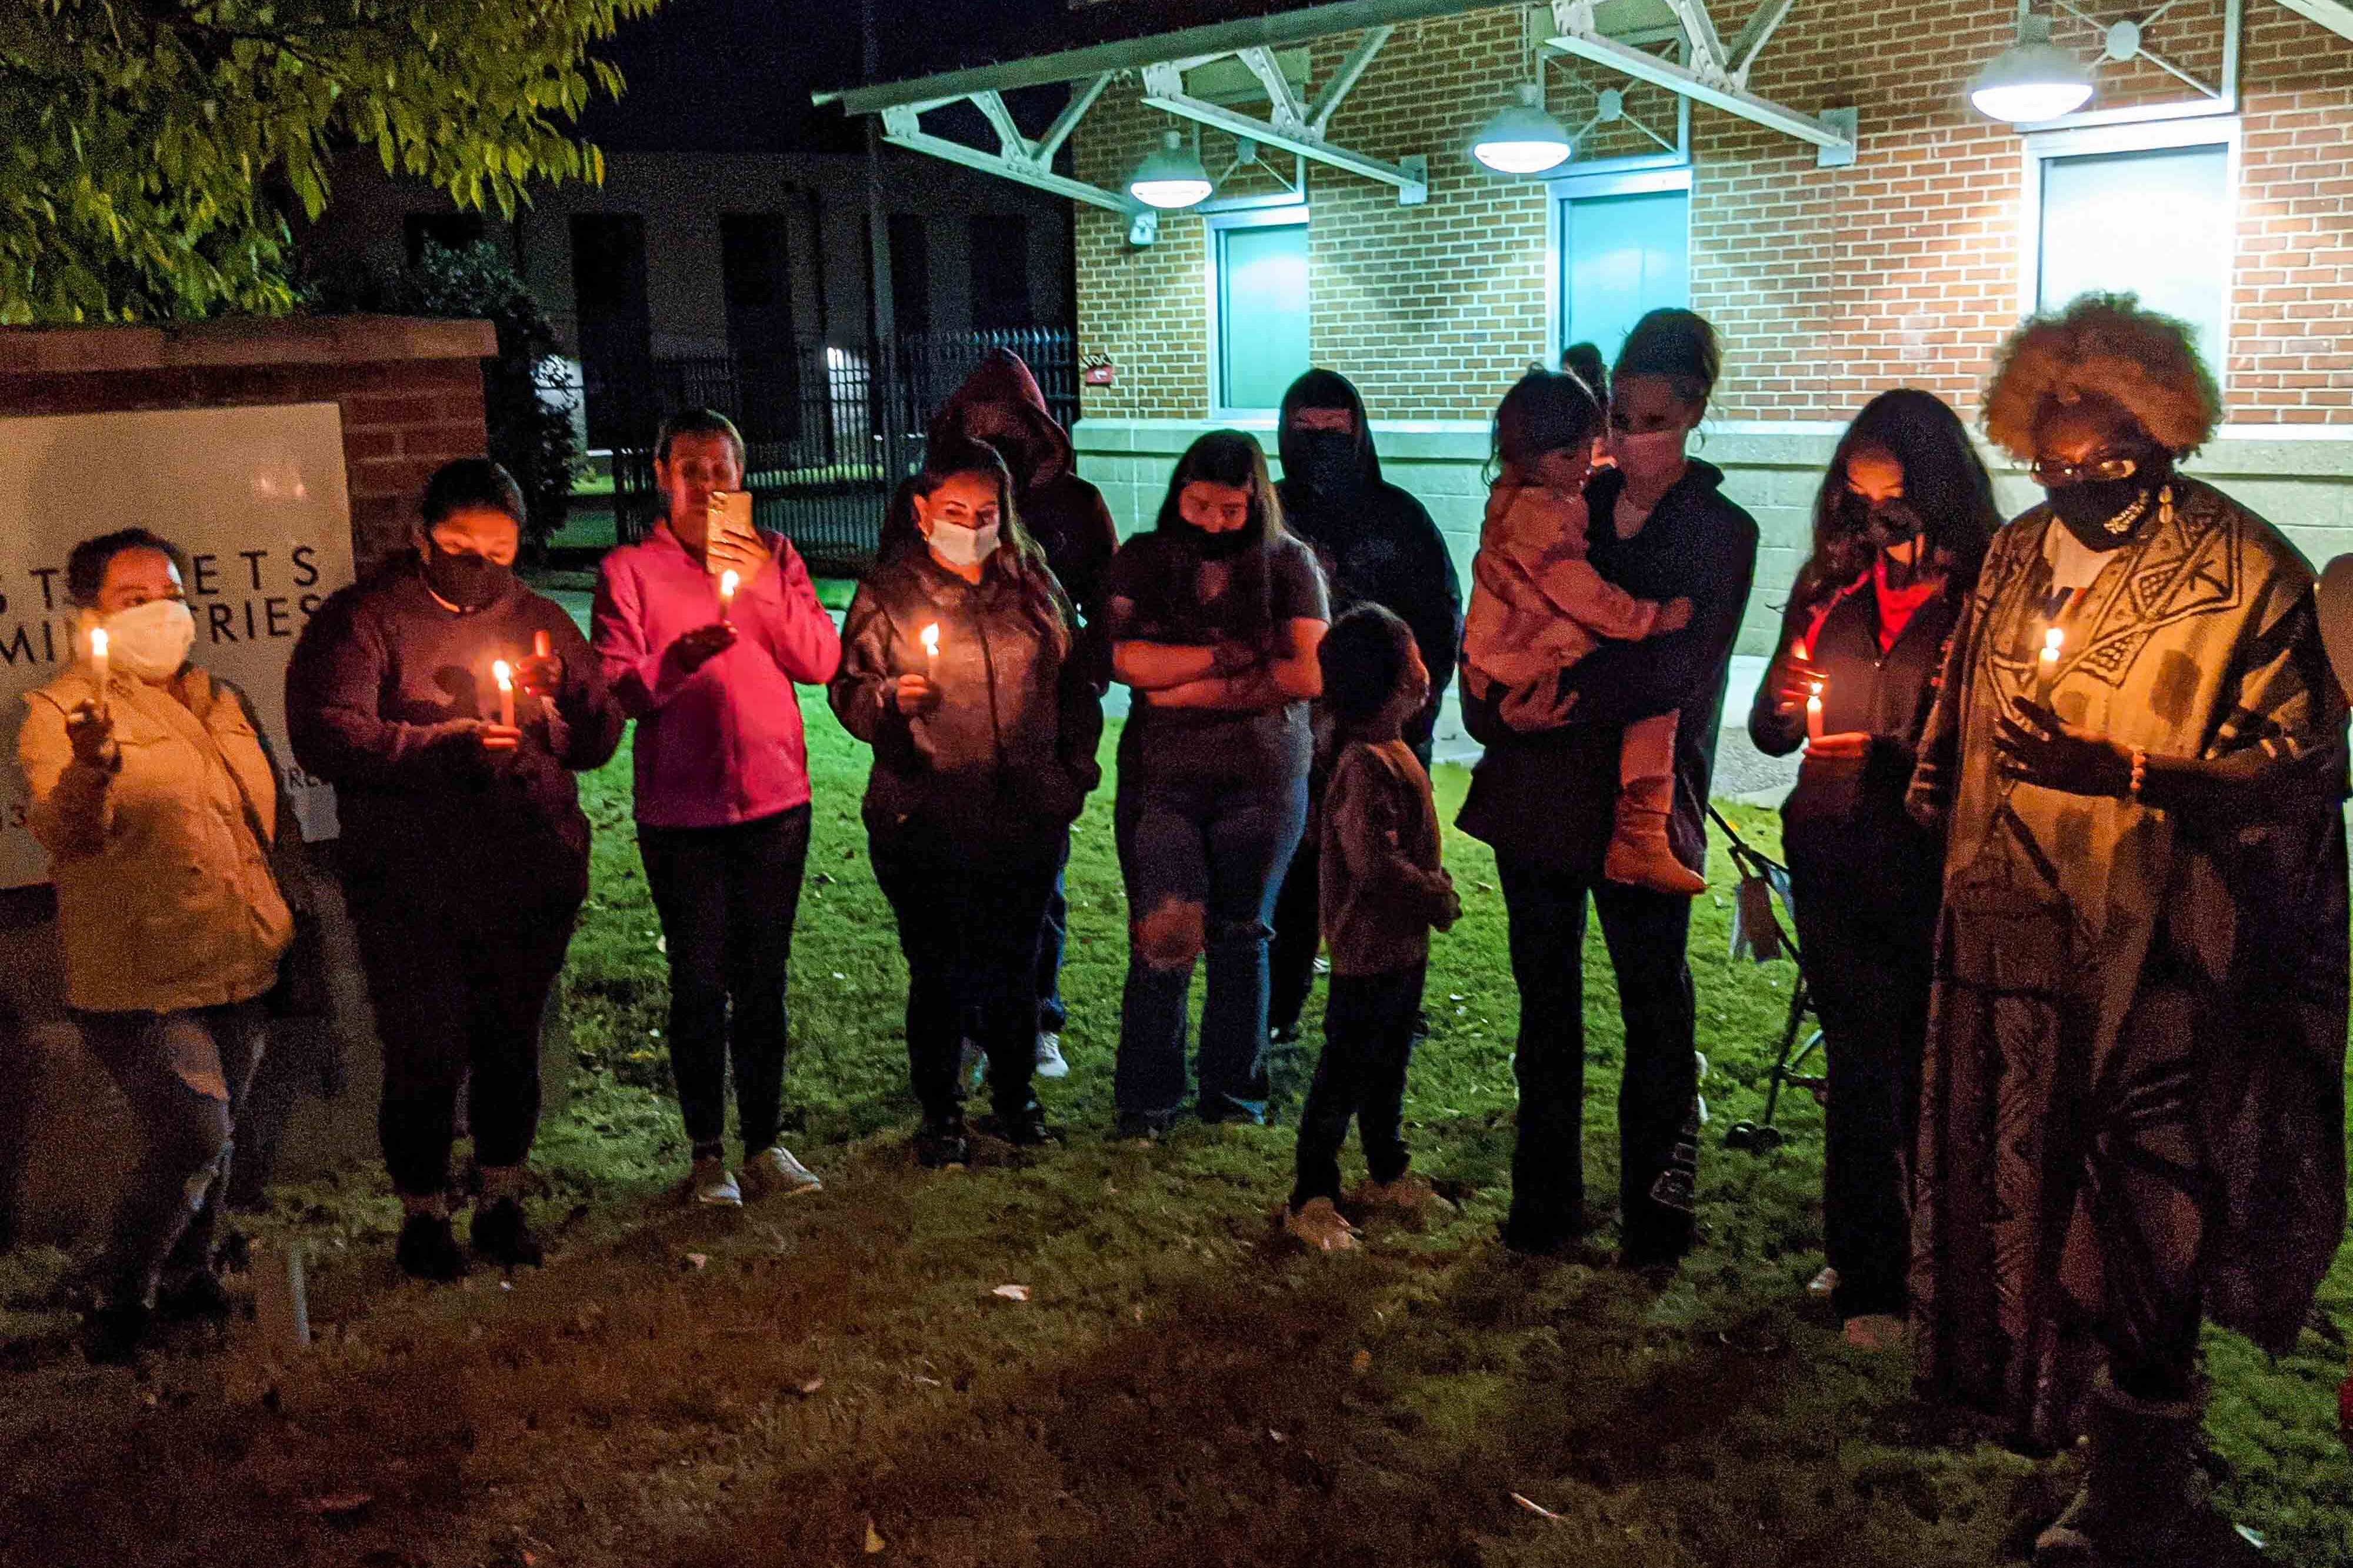 About a dozen people stand outside at night in a semi-circle holding candles during a candlelight vigil in front of a community center.